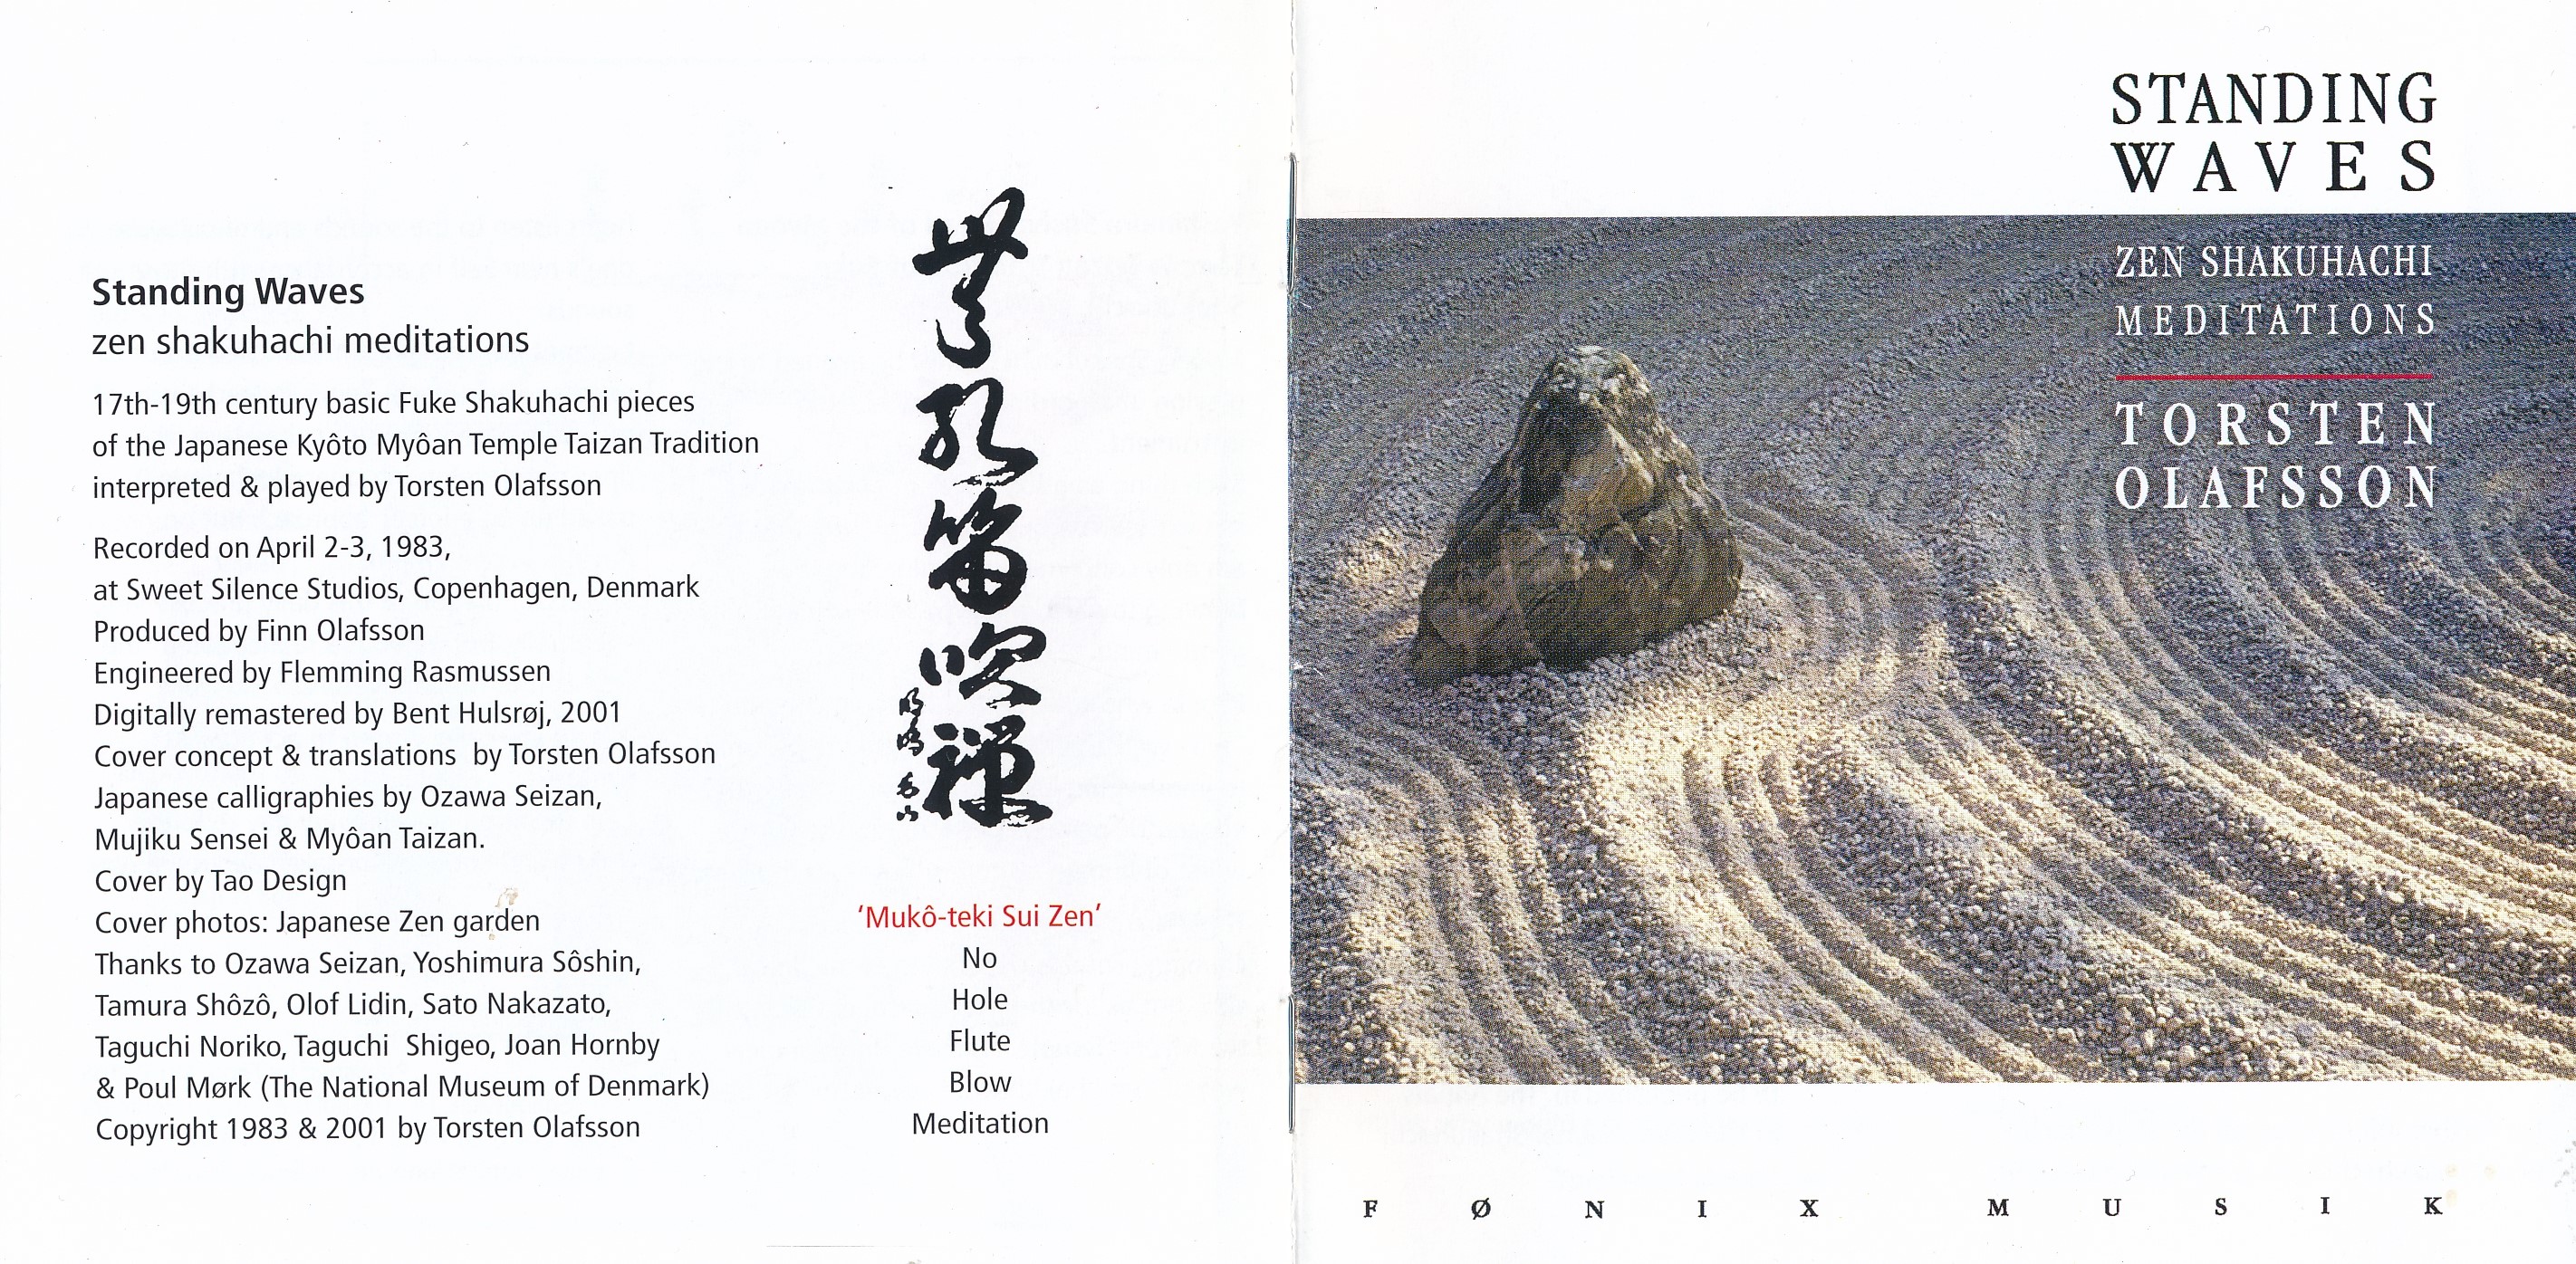 Standing Waves 2001 CD booklet